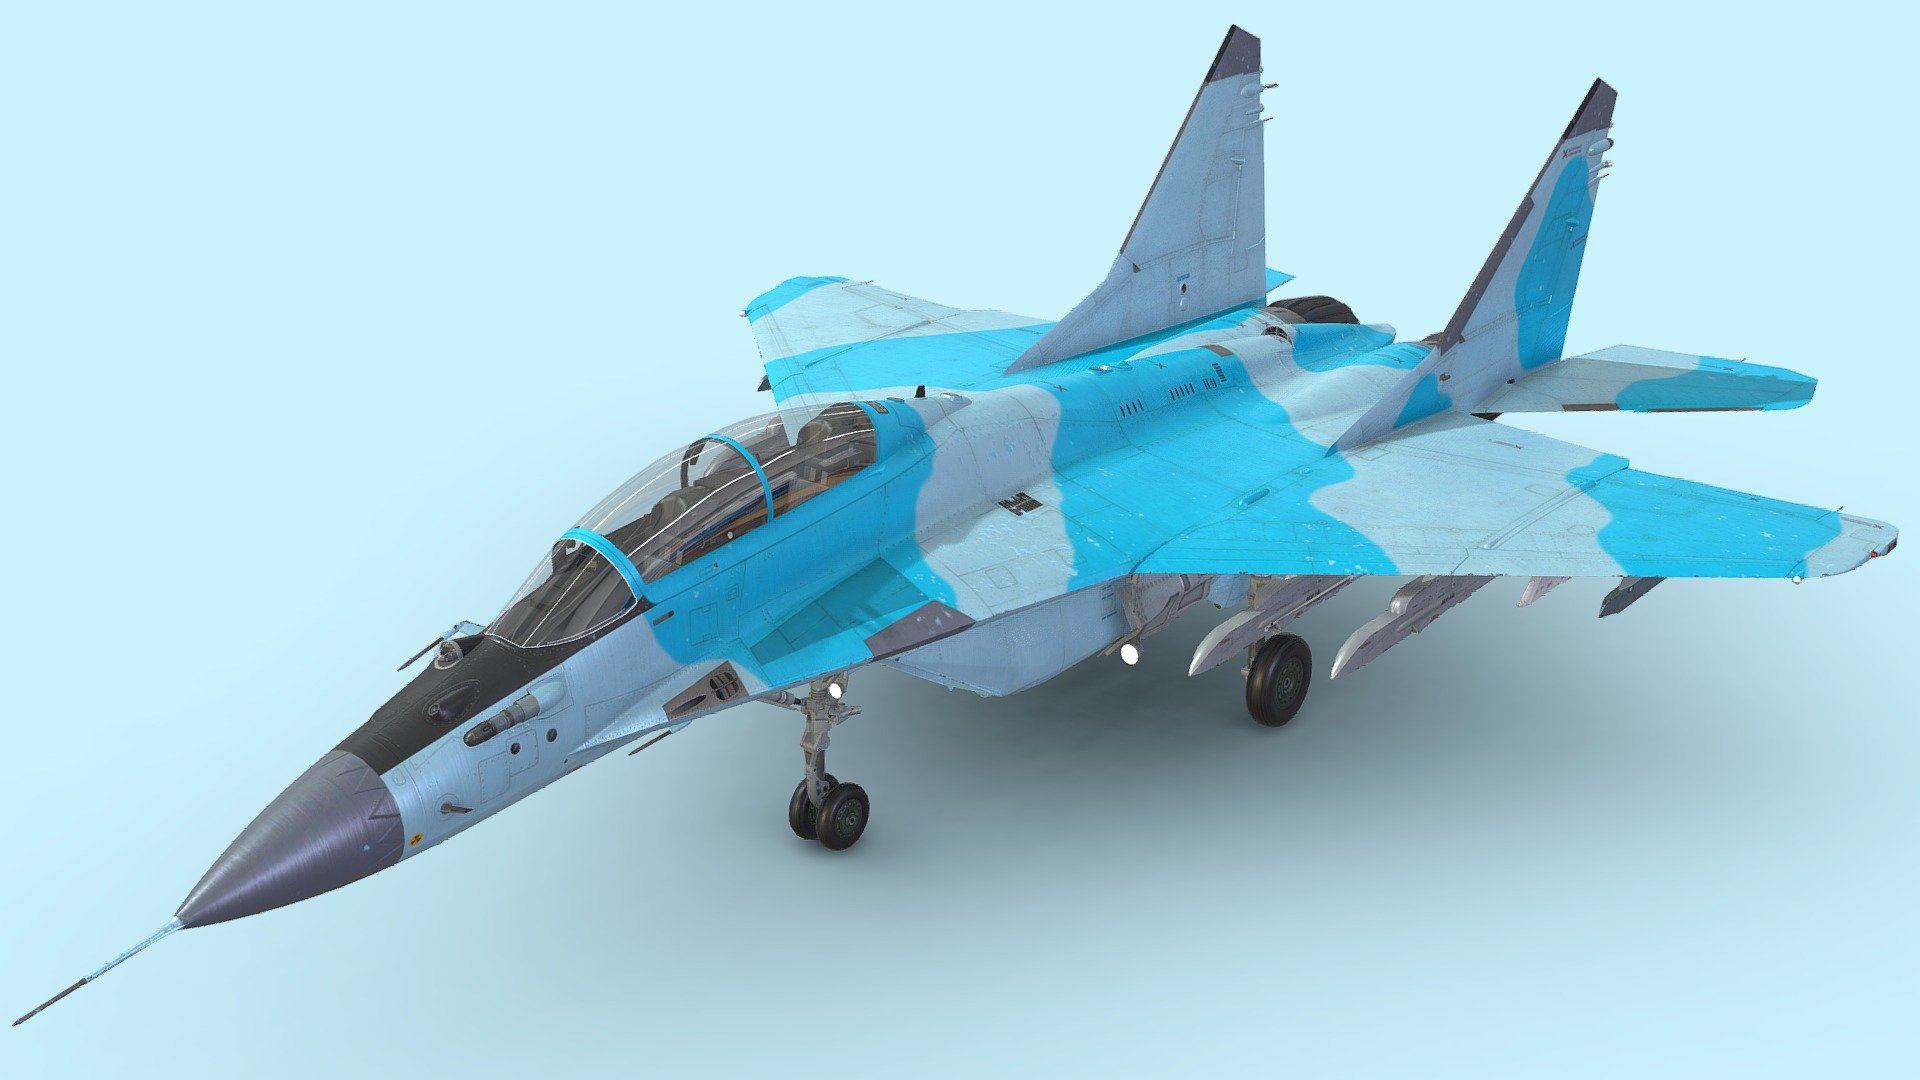 The Mikoyan MiG-35 NATO reporting name: Fulcrum-F) is a Russian multirole fighter that is designed by Mikoyan.

Mikoyan first officially presented the MiG-35 internationally during the 2017 Moscow air show, the first two serial production aircraft entered service in 2019.

The fighter has vastly improved avionics and weapon systems compared to early variants of MiG-29, notably new precision-guided targeting capability and the uniquely designed optical locator system, which relieves the aircraft from relying on ground-controlled interception systems and enables it to conduct independent multirole missions 3d model